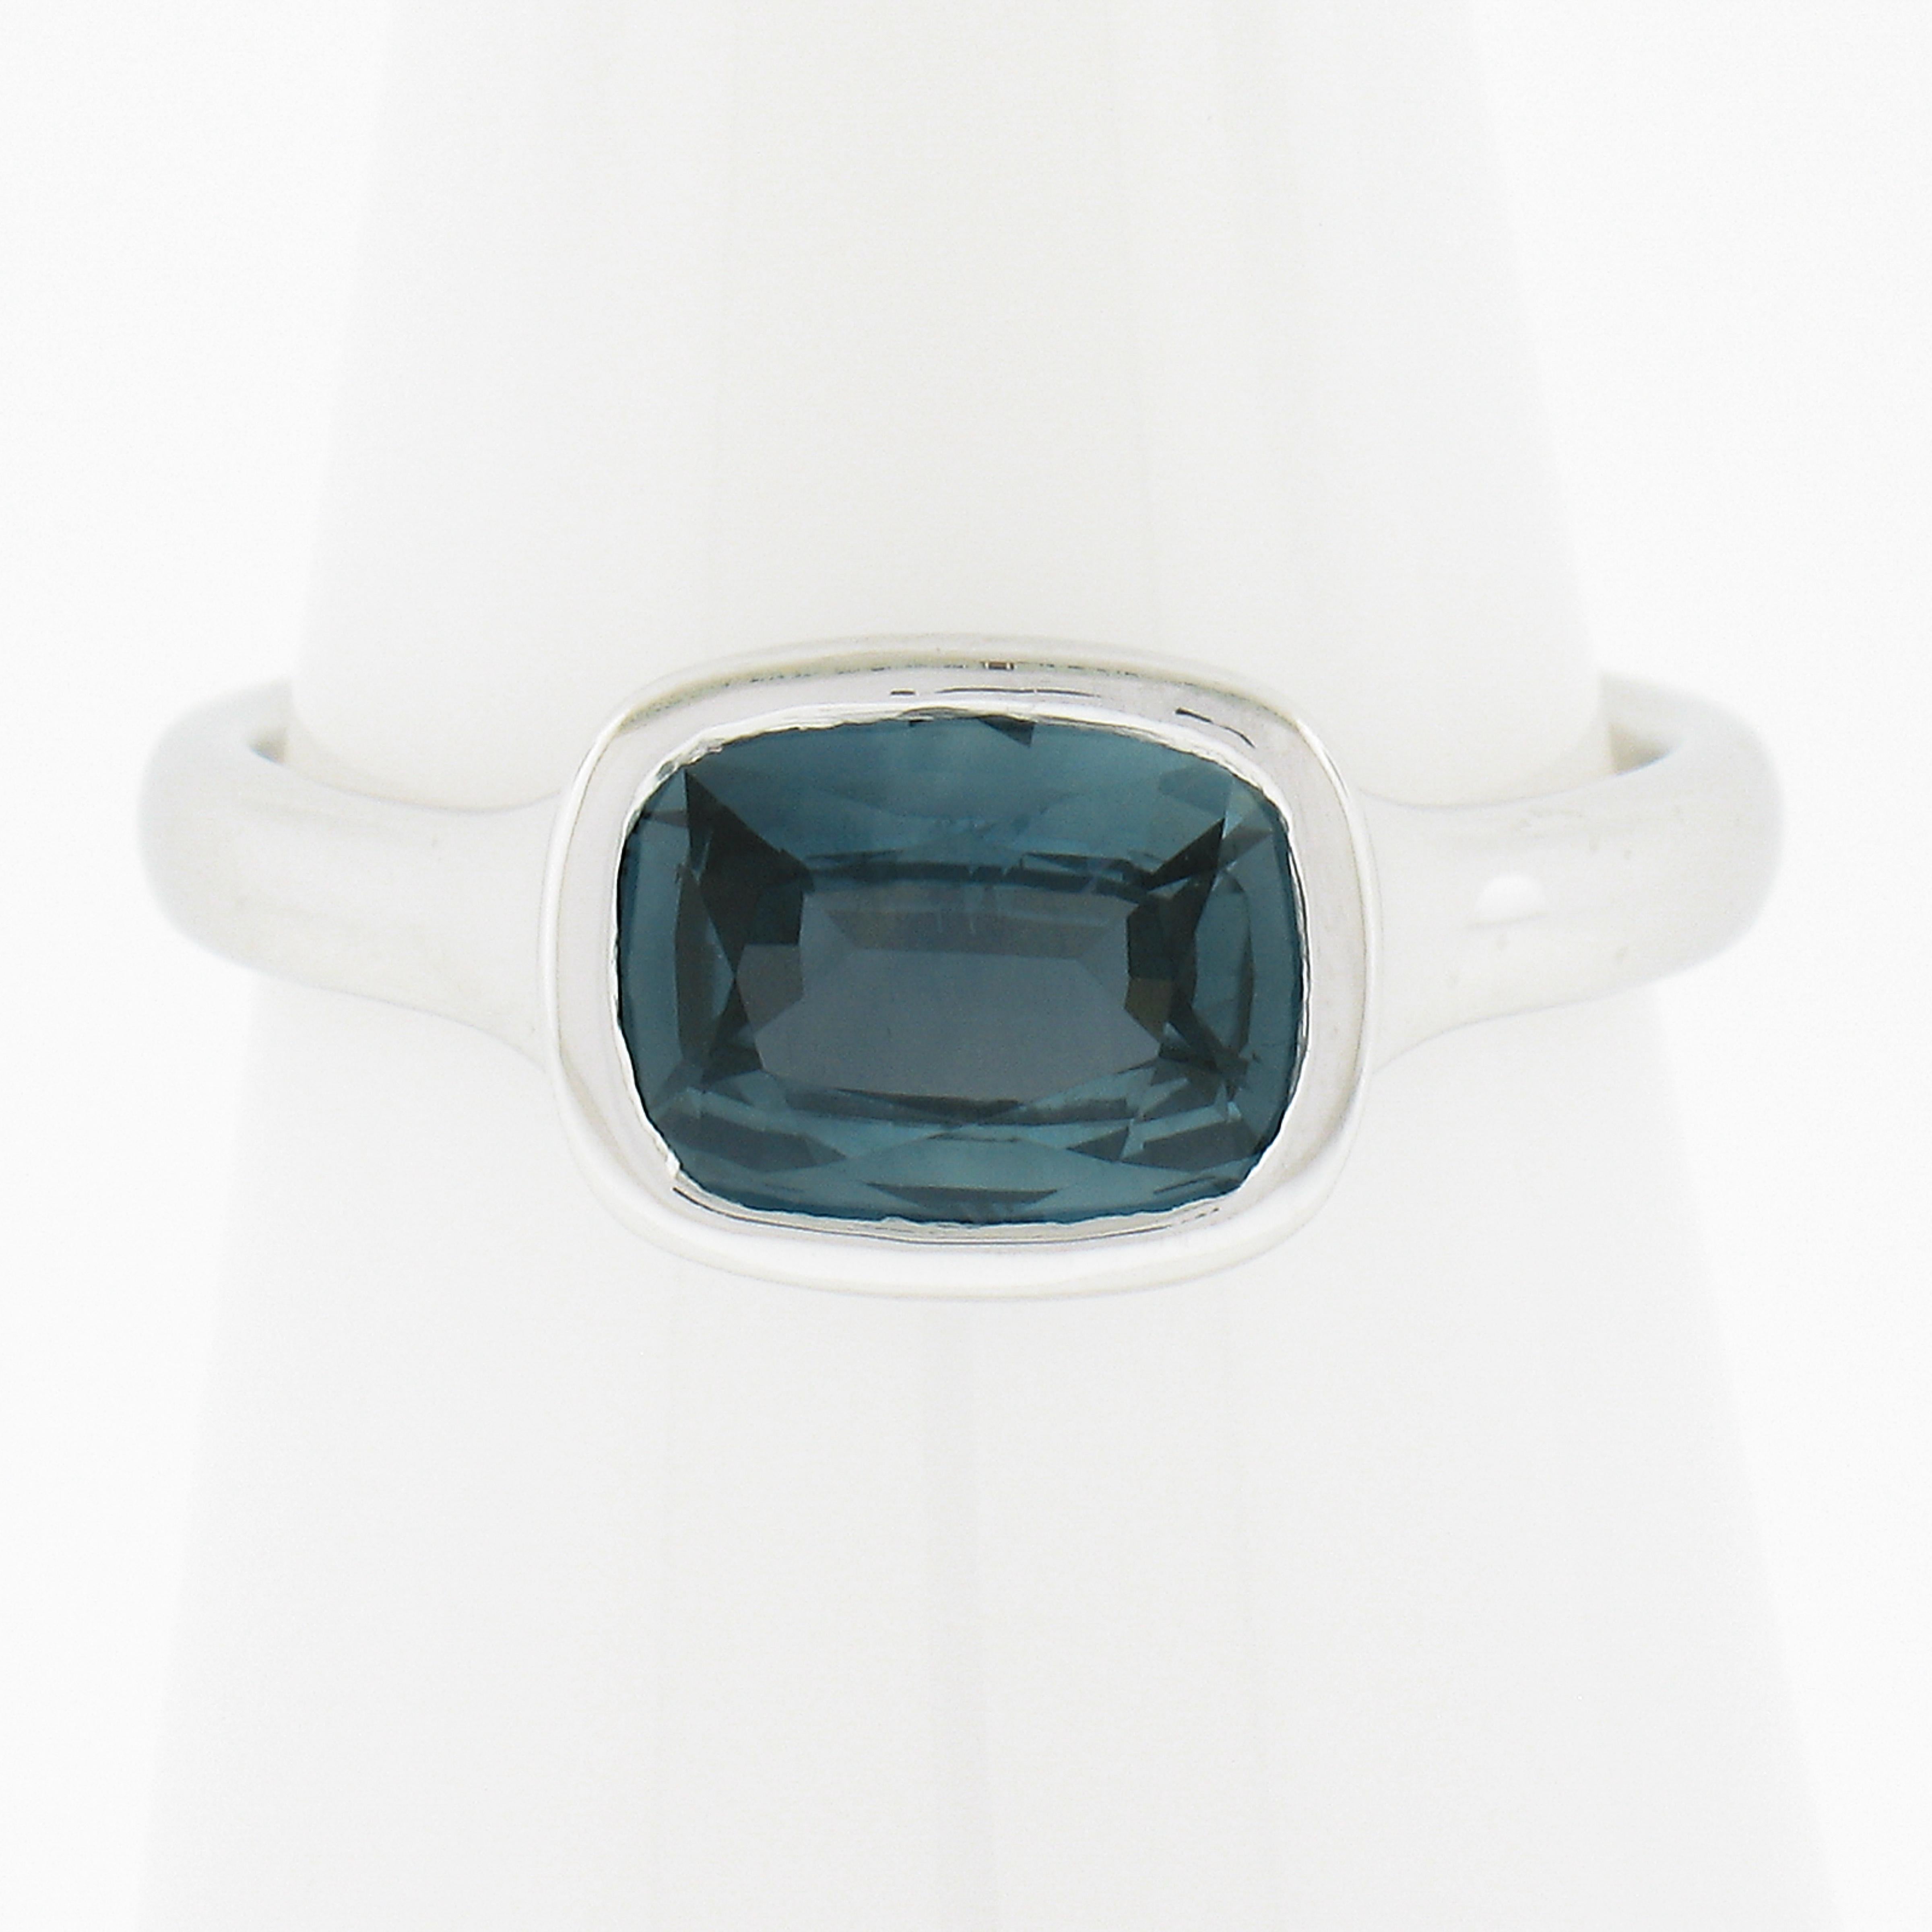 --Stone(s):--
(1) Natural Genuine Sapphire - Cushion Brilliant Cut - Bezel Set - Slightly Greenish Blue Color - Heated - 2.04ct (exact - certified)
** See Certification Details Below for Complete Info **
Total Carat Weight:	2.04 (exact)

Material: